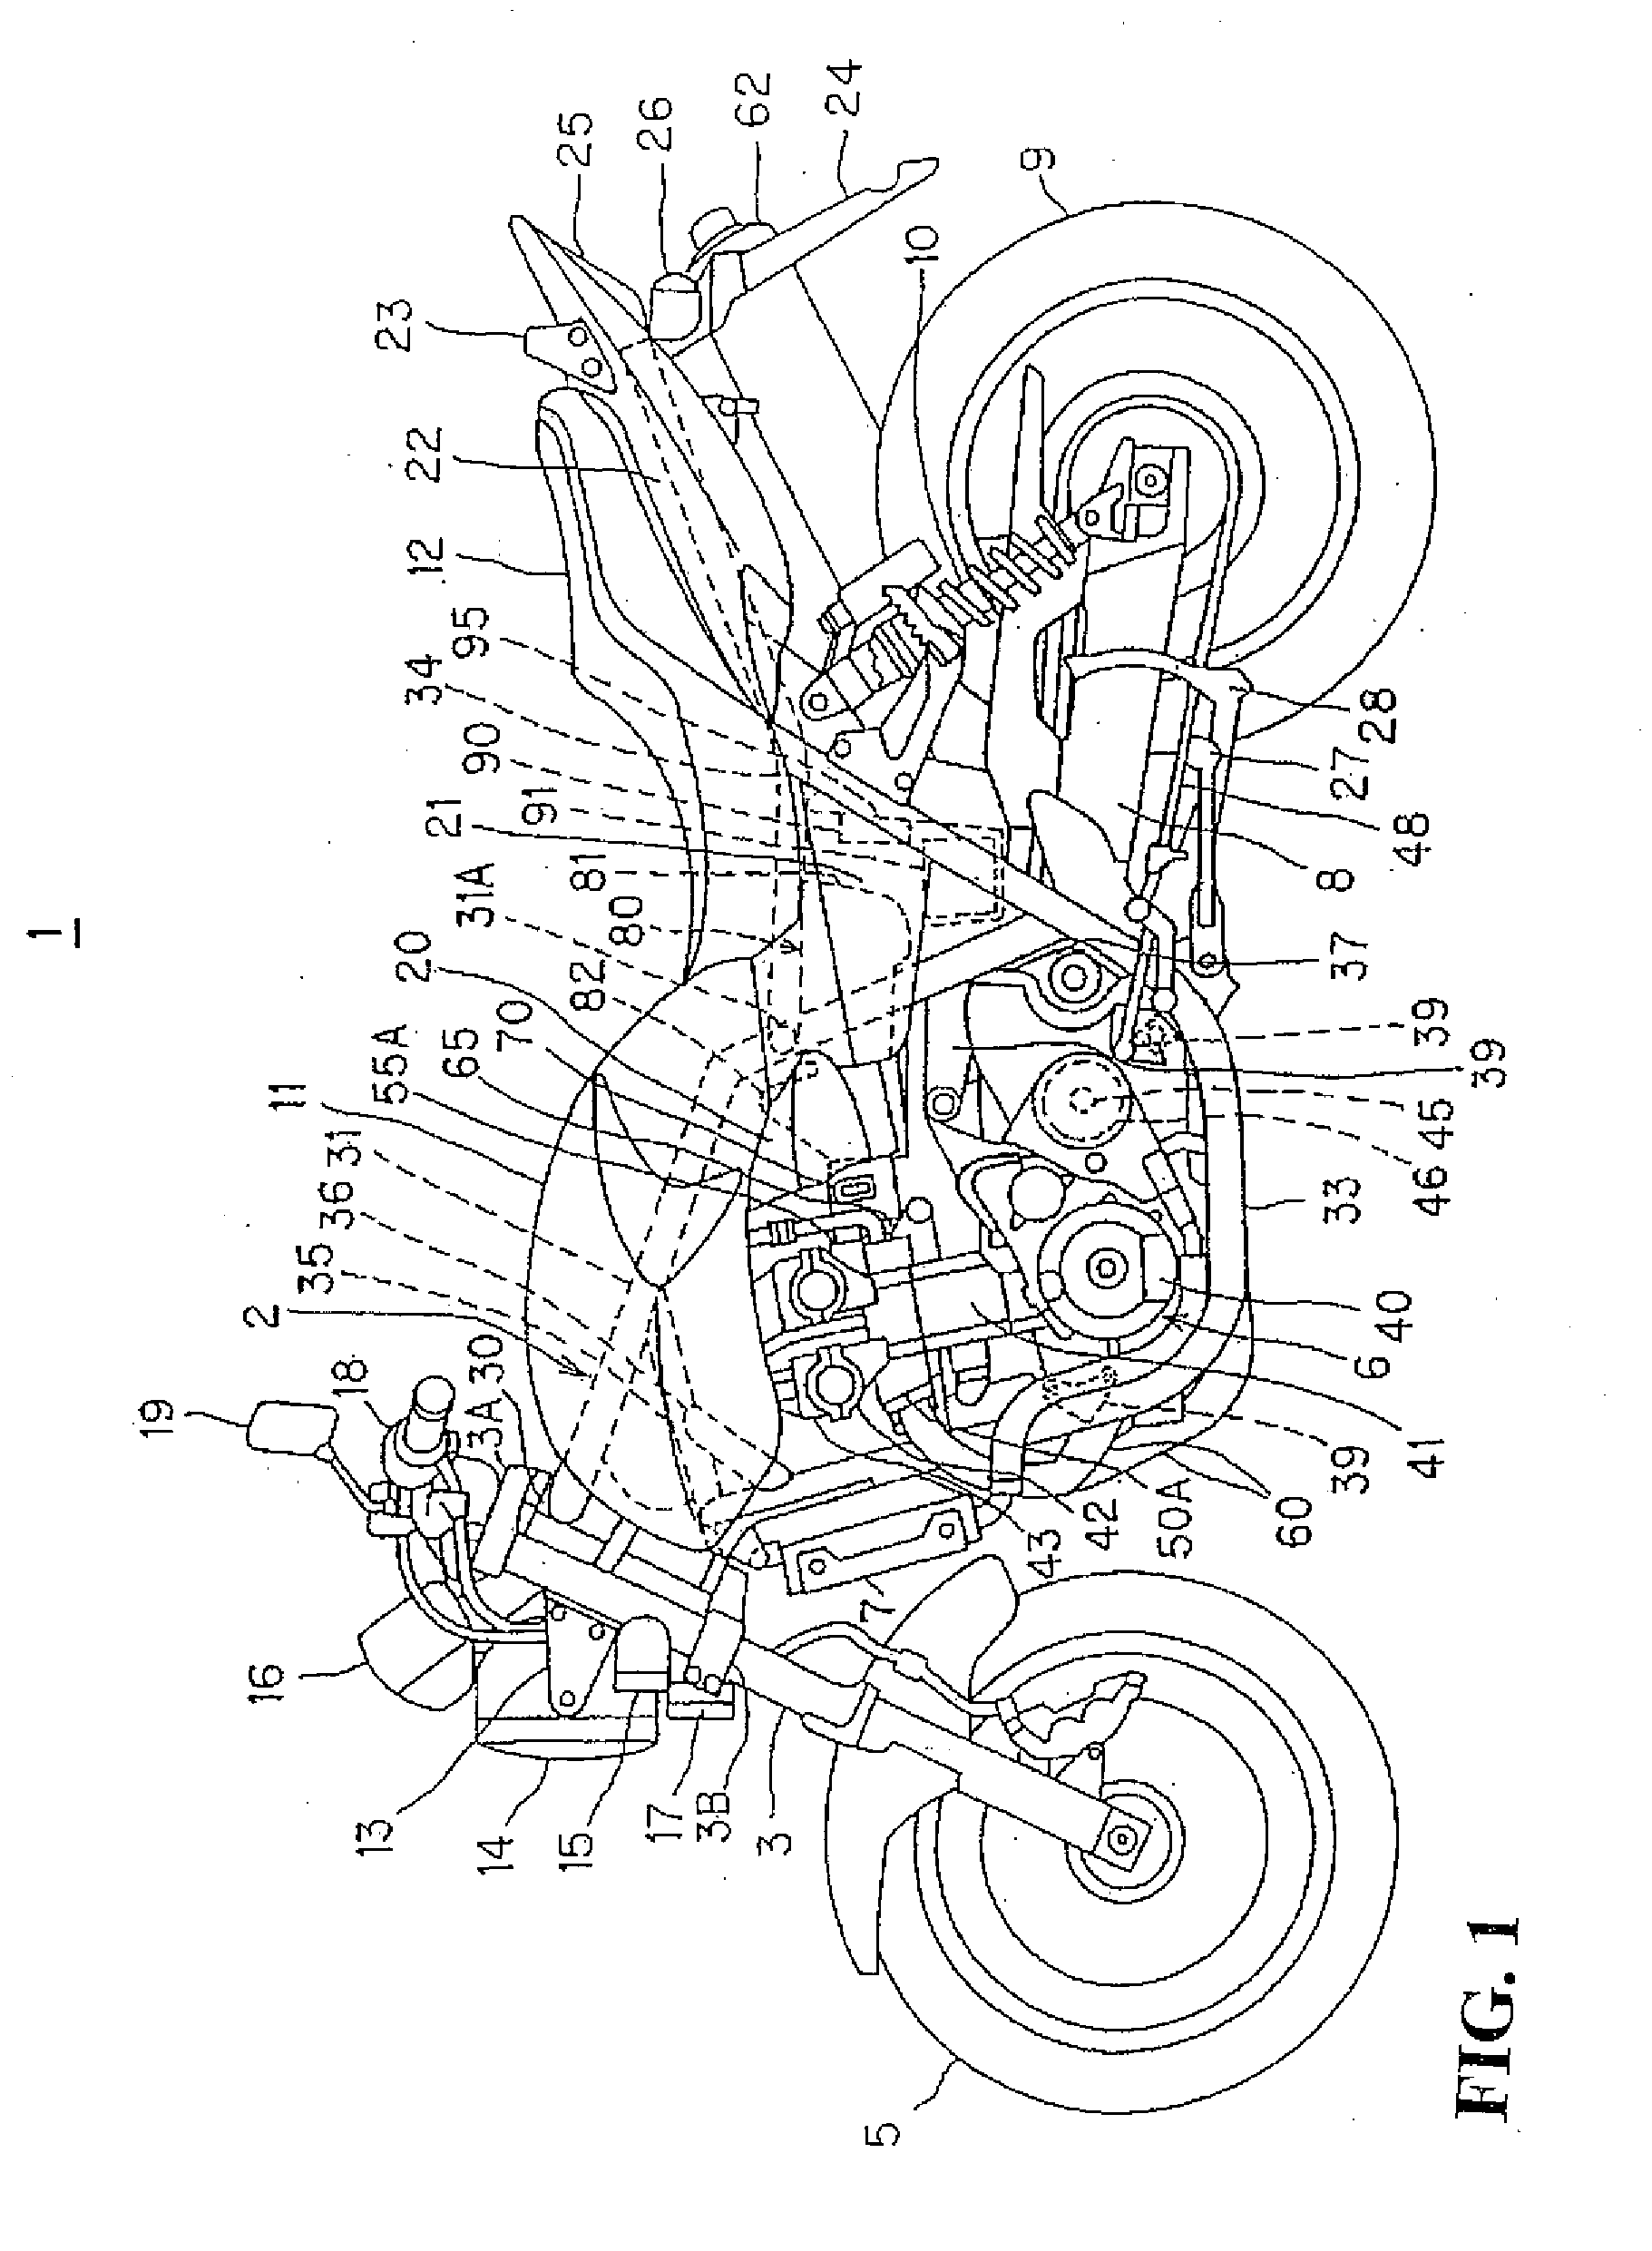 Acceleration shock reduction control system for vehicle